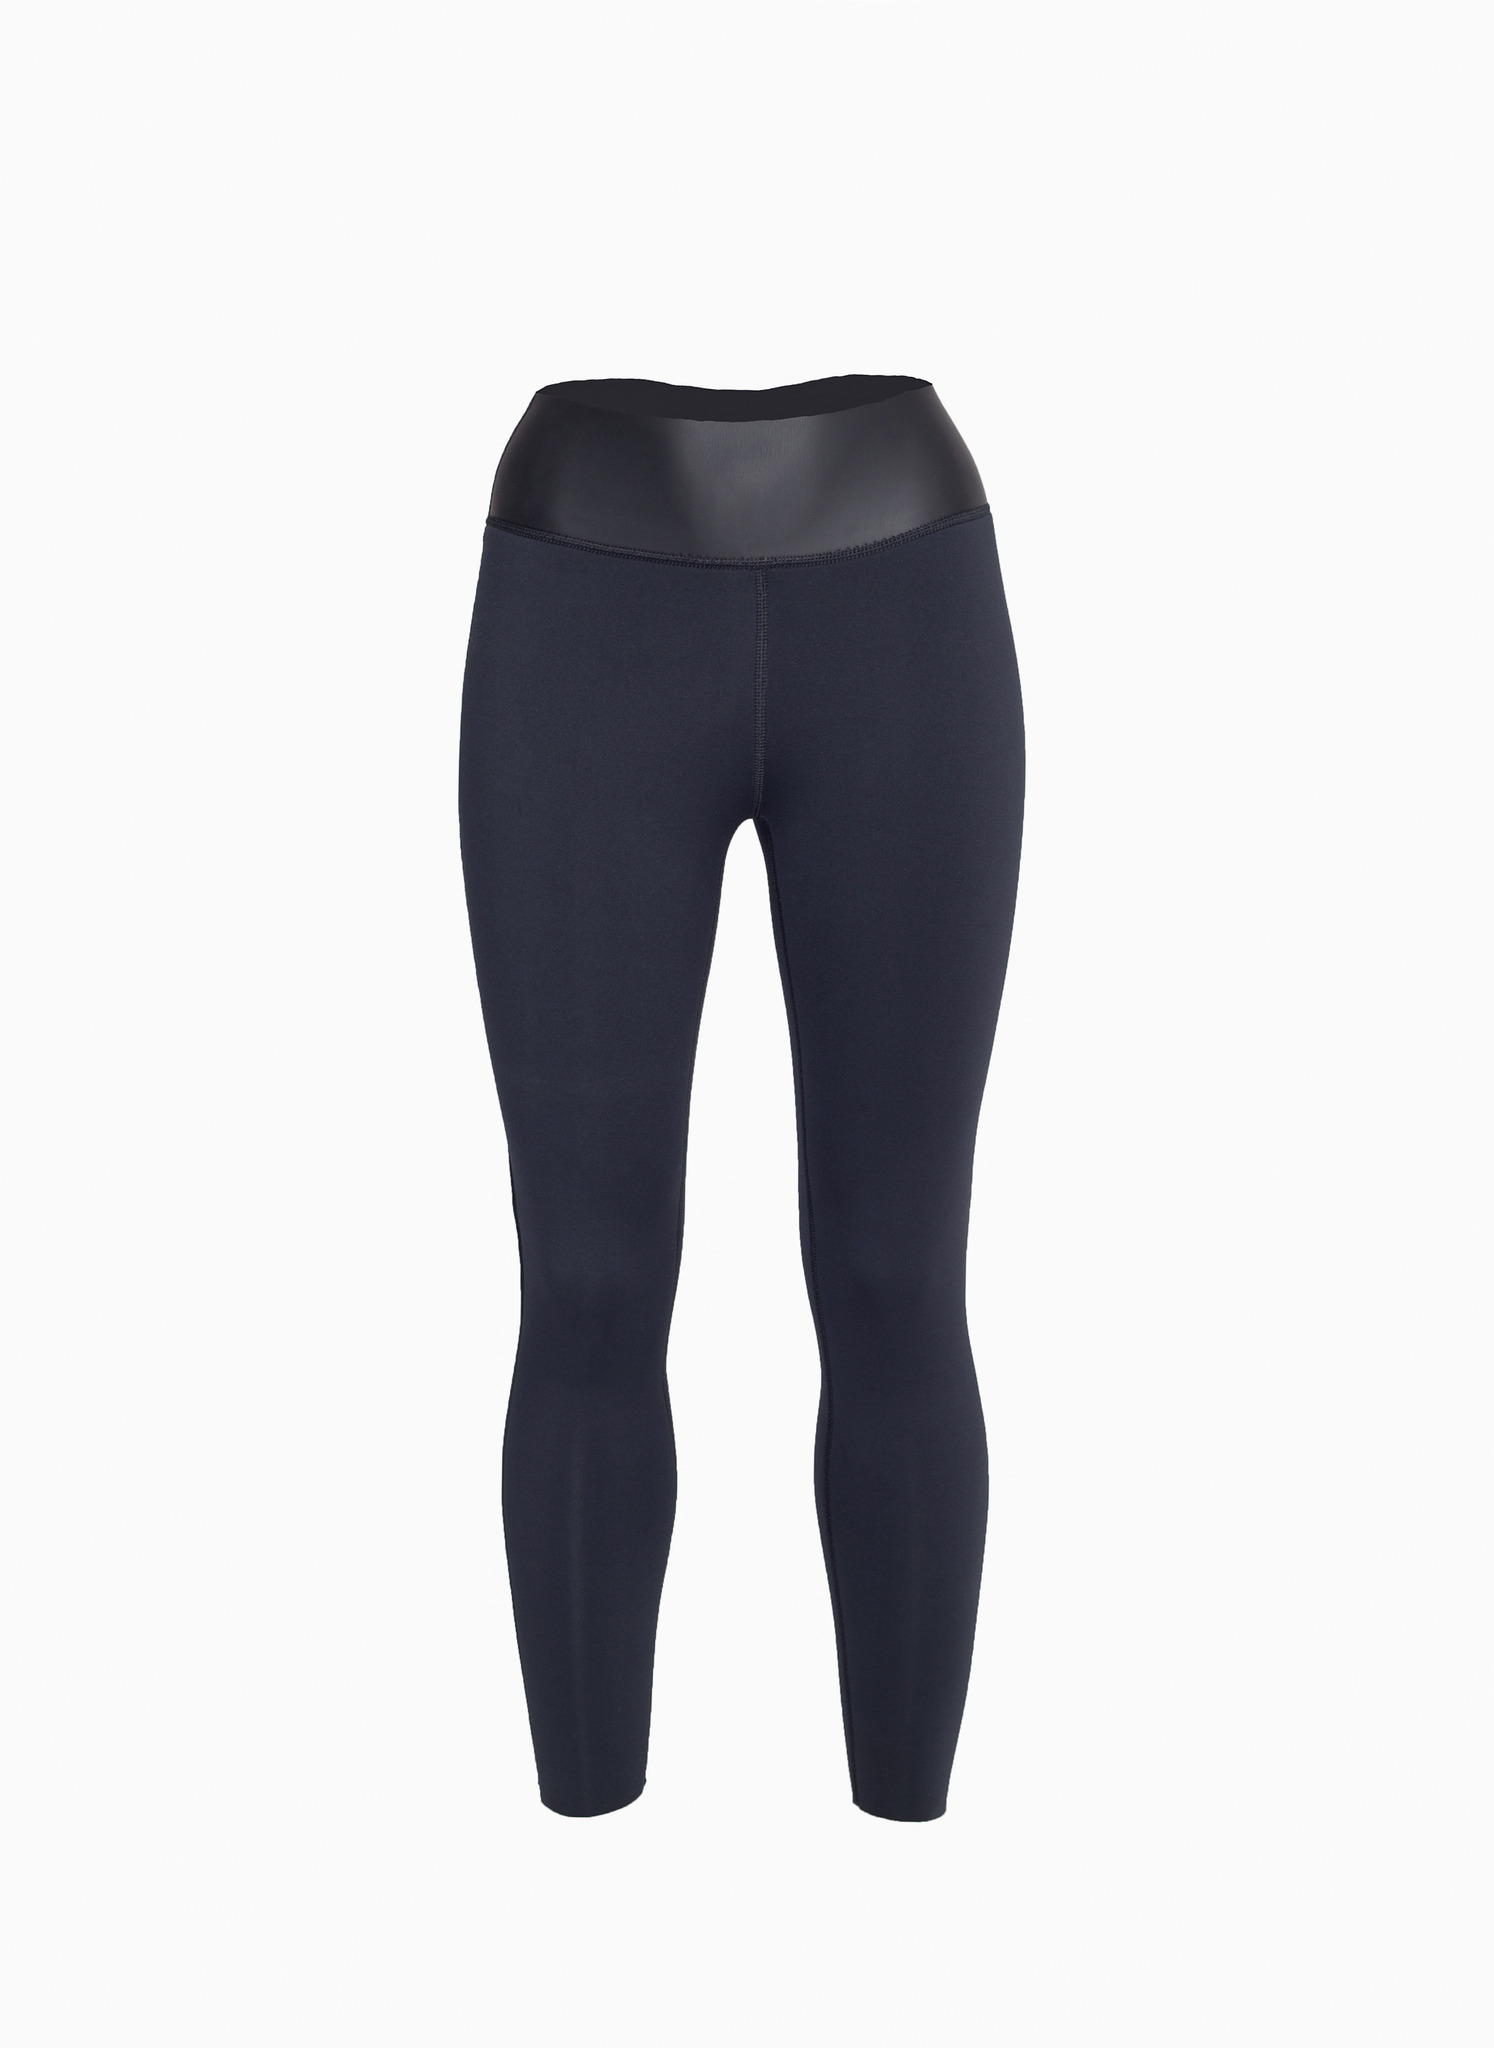 Kualuah neoprene leggings. Keeping you warm while surfing, diving, kiteboarding and wakeboarding . Wear it with our shorty, wetsuit, swimsuit to explore our oceans. Made out of limestone neoprene.